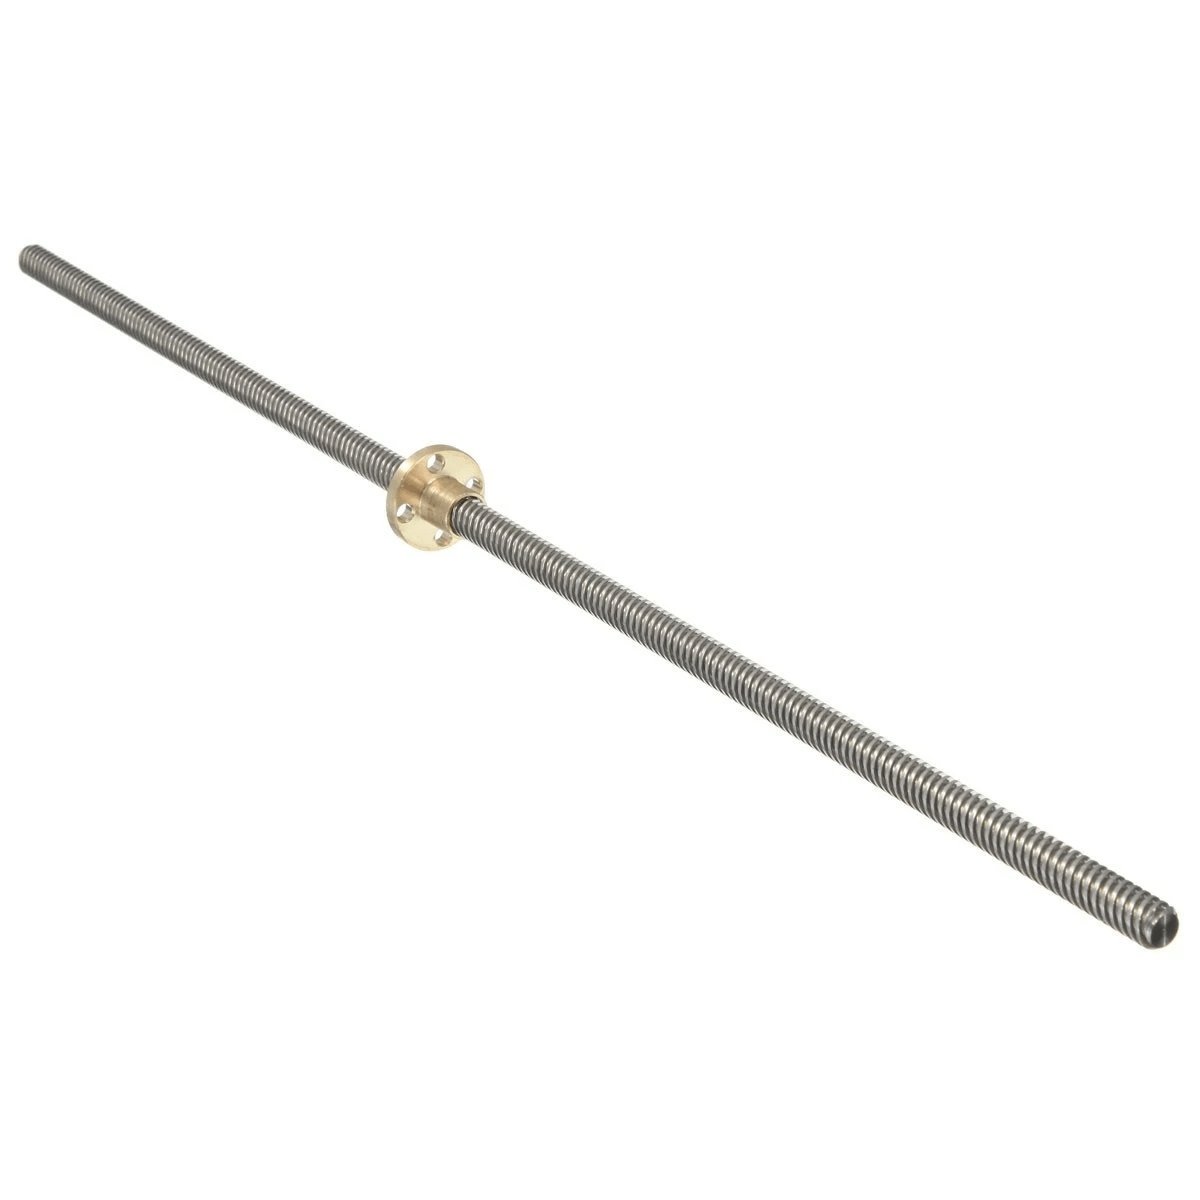 400mm Z-Axis Stainless Steel Threaded Rod Lead Screw with T8 Nut